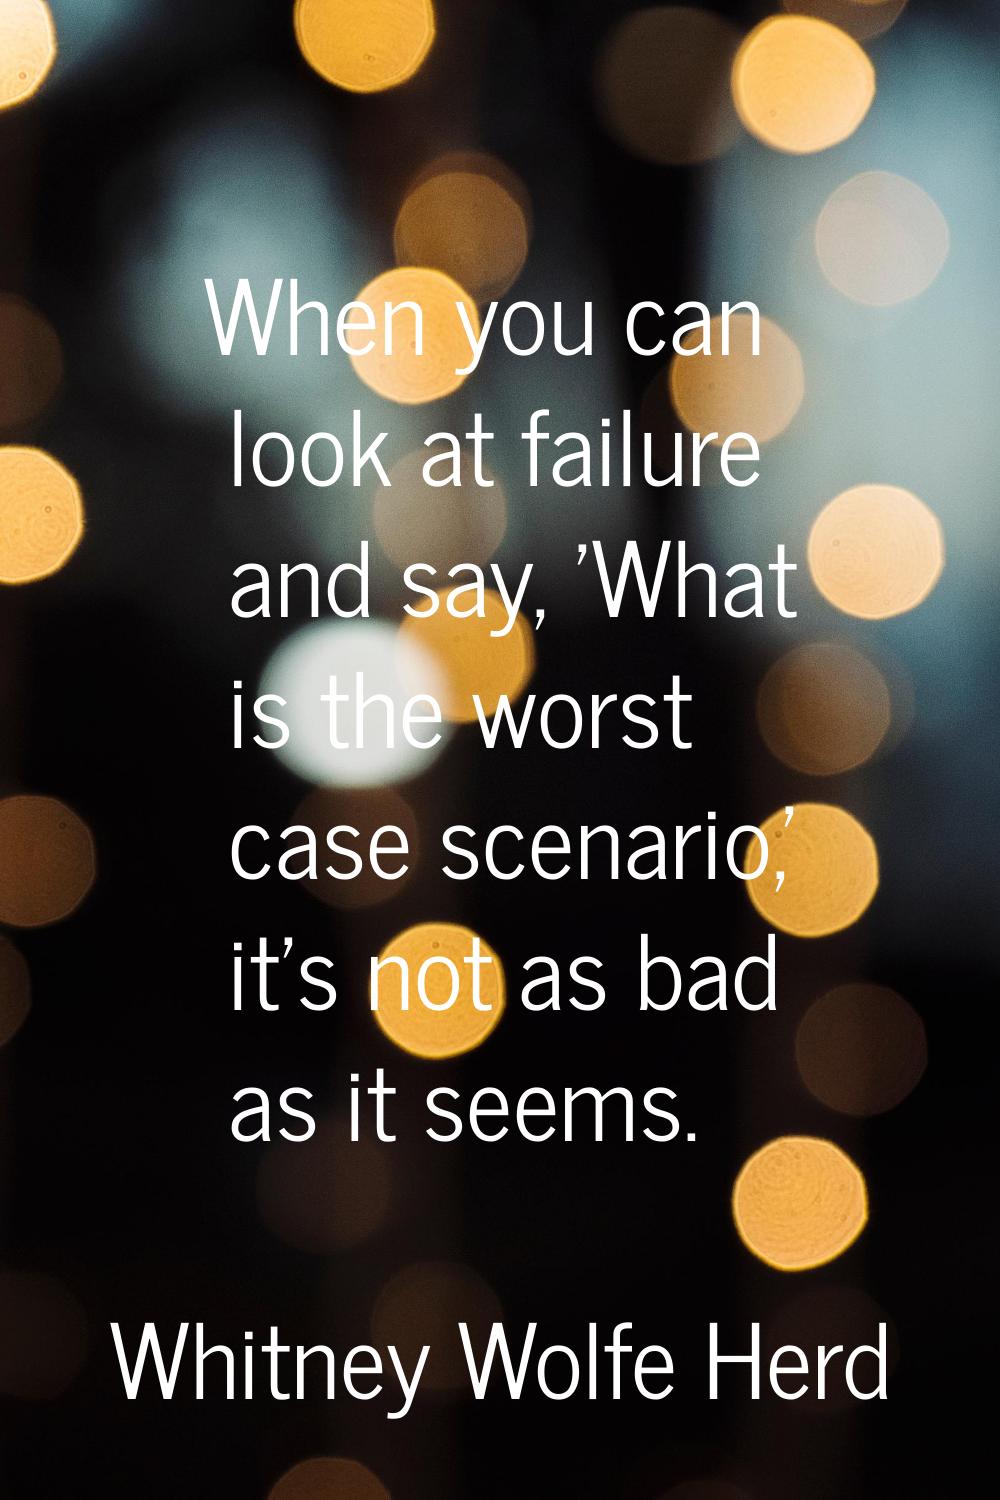 When you can look at failure and say, 'What is the worst case scenario,' it's not as bad as it seem